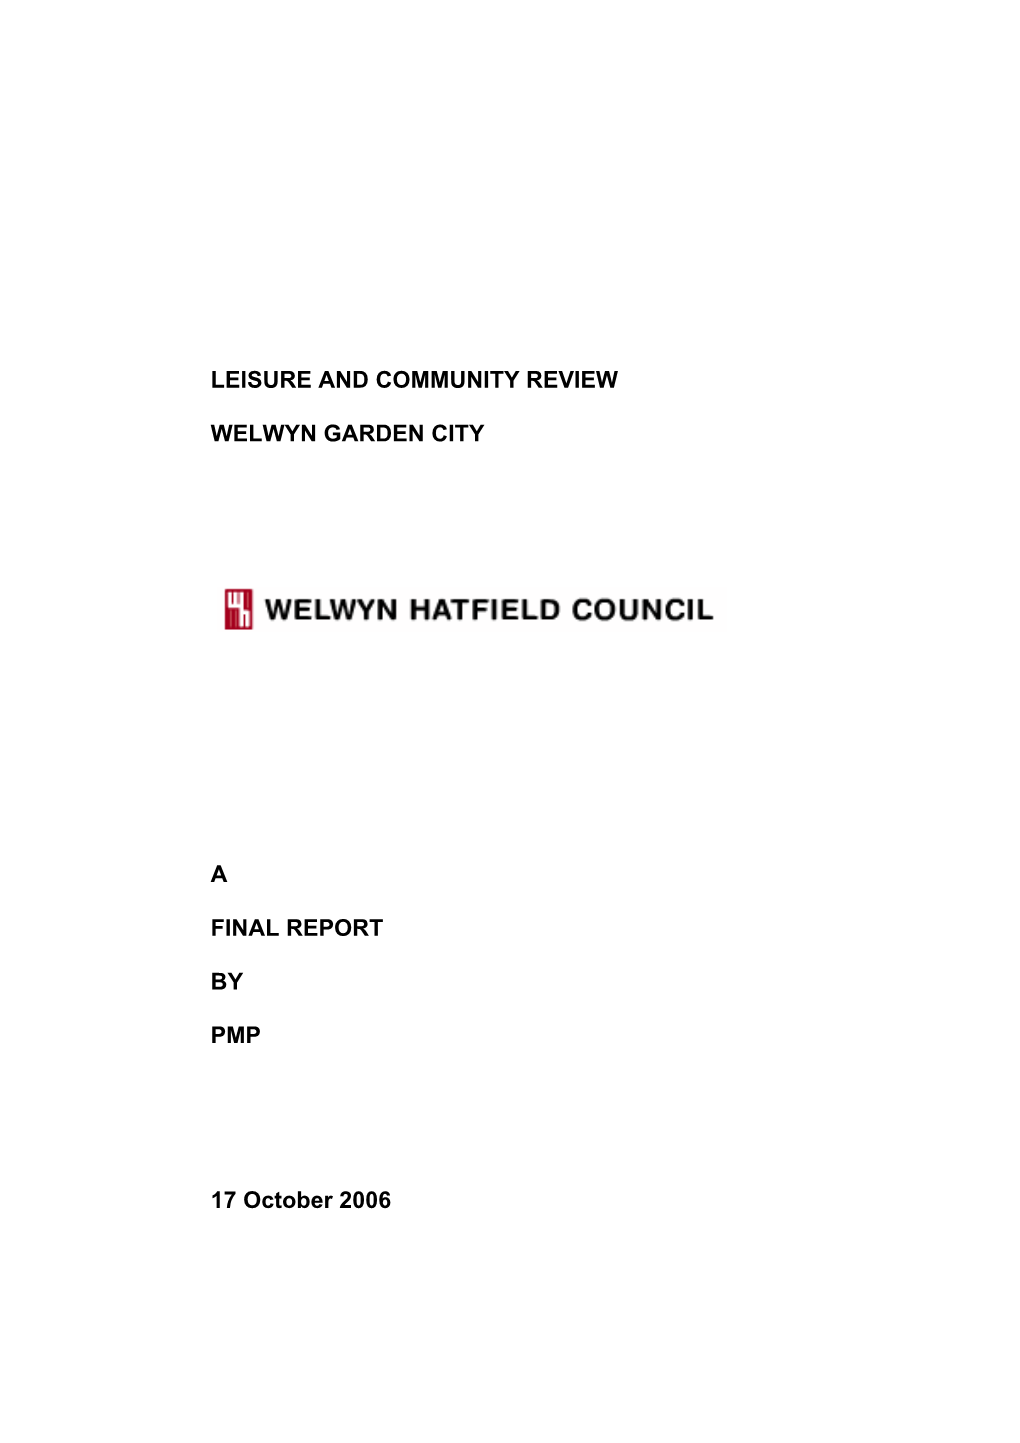 Welwyn Garden City Leisure and Community Review